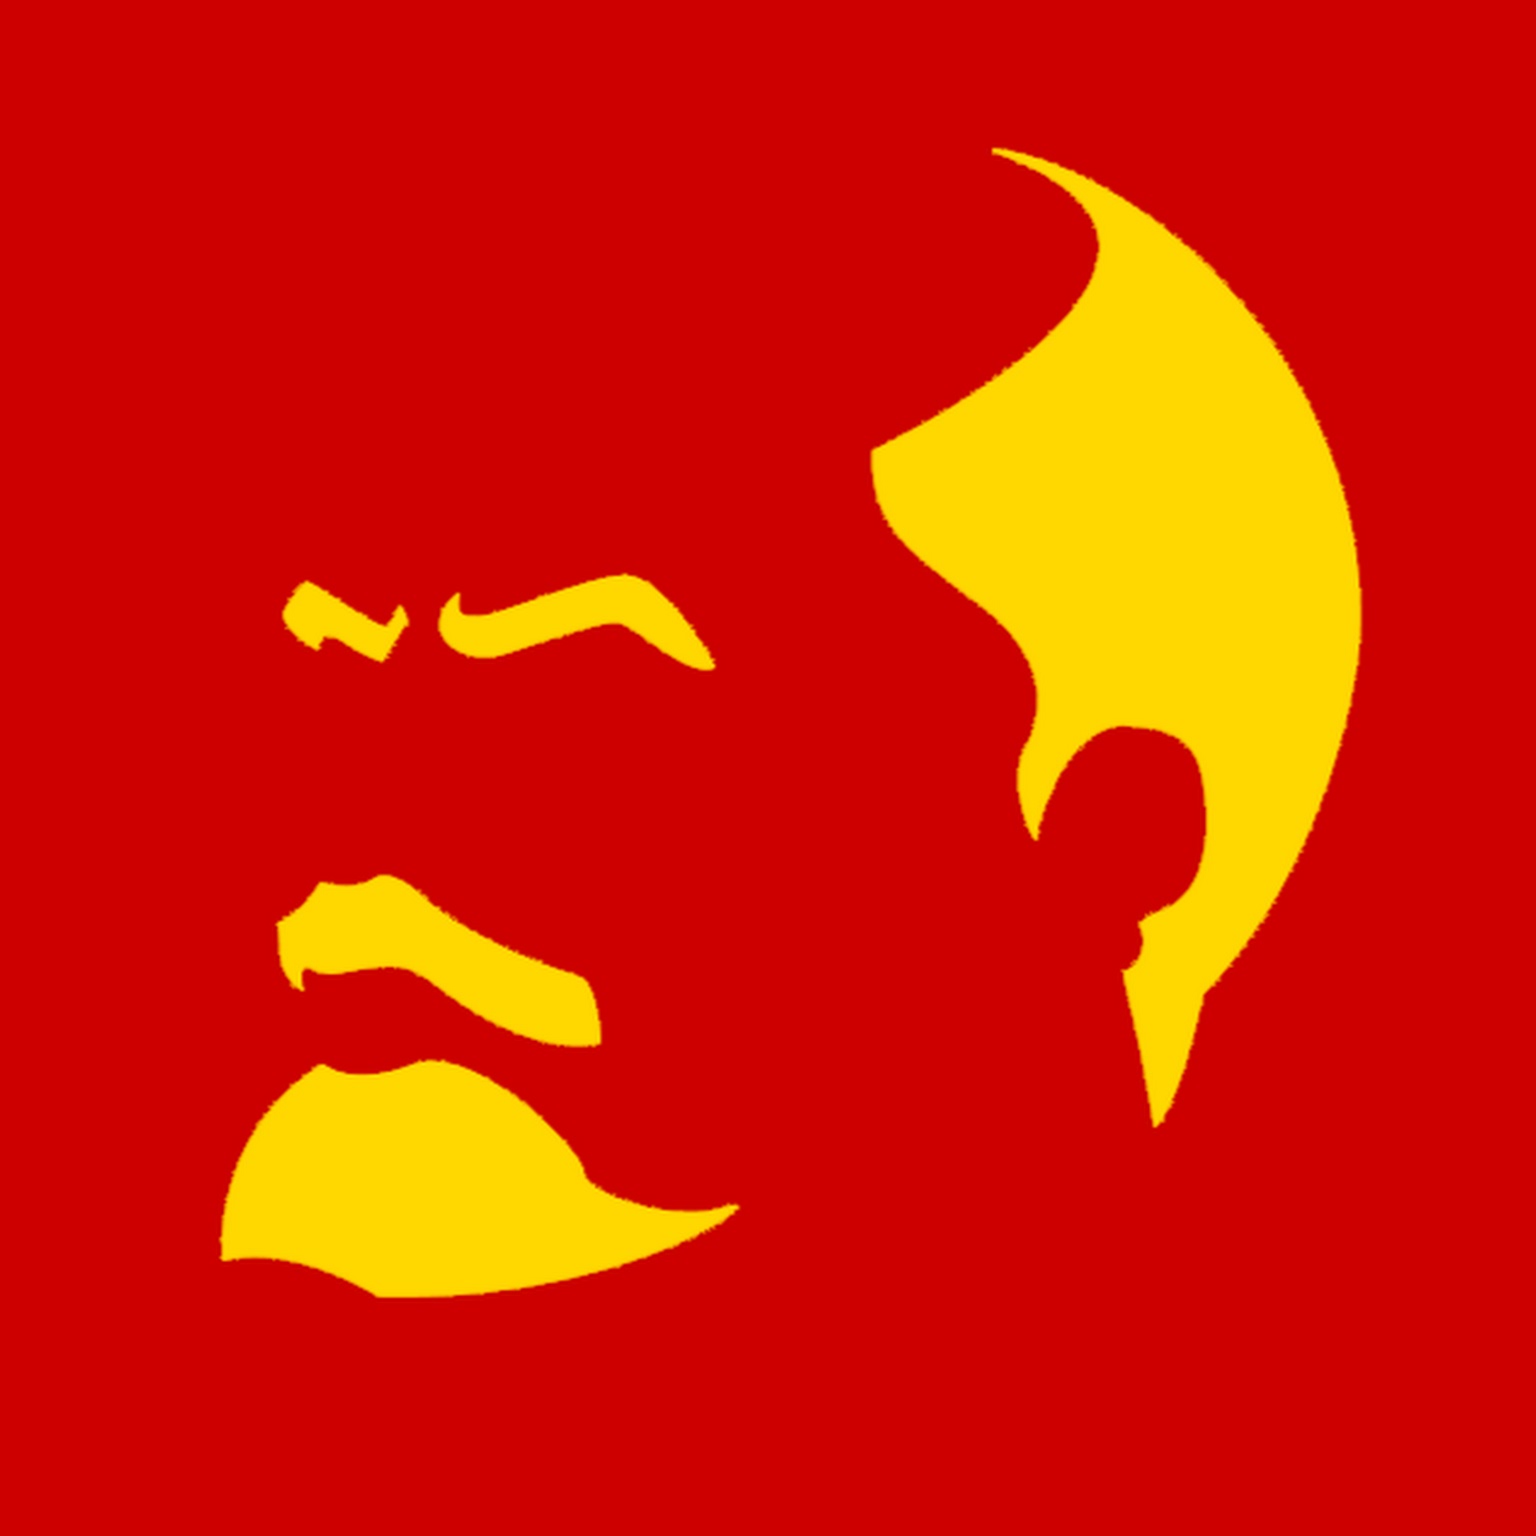 A yellow Lenin face on a red background.